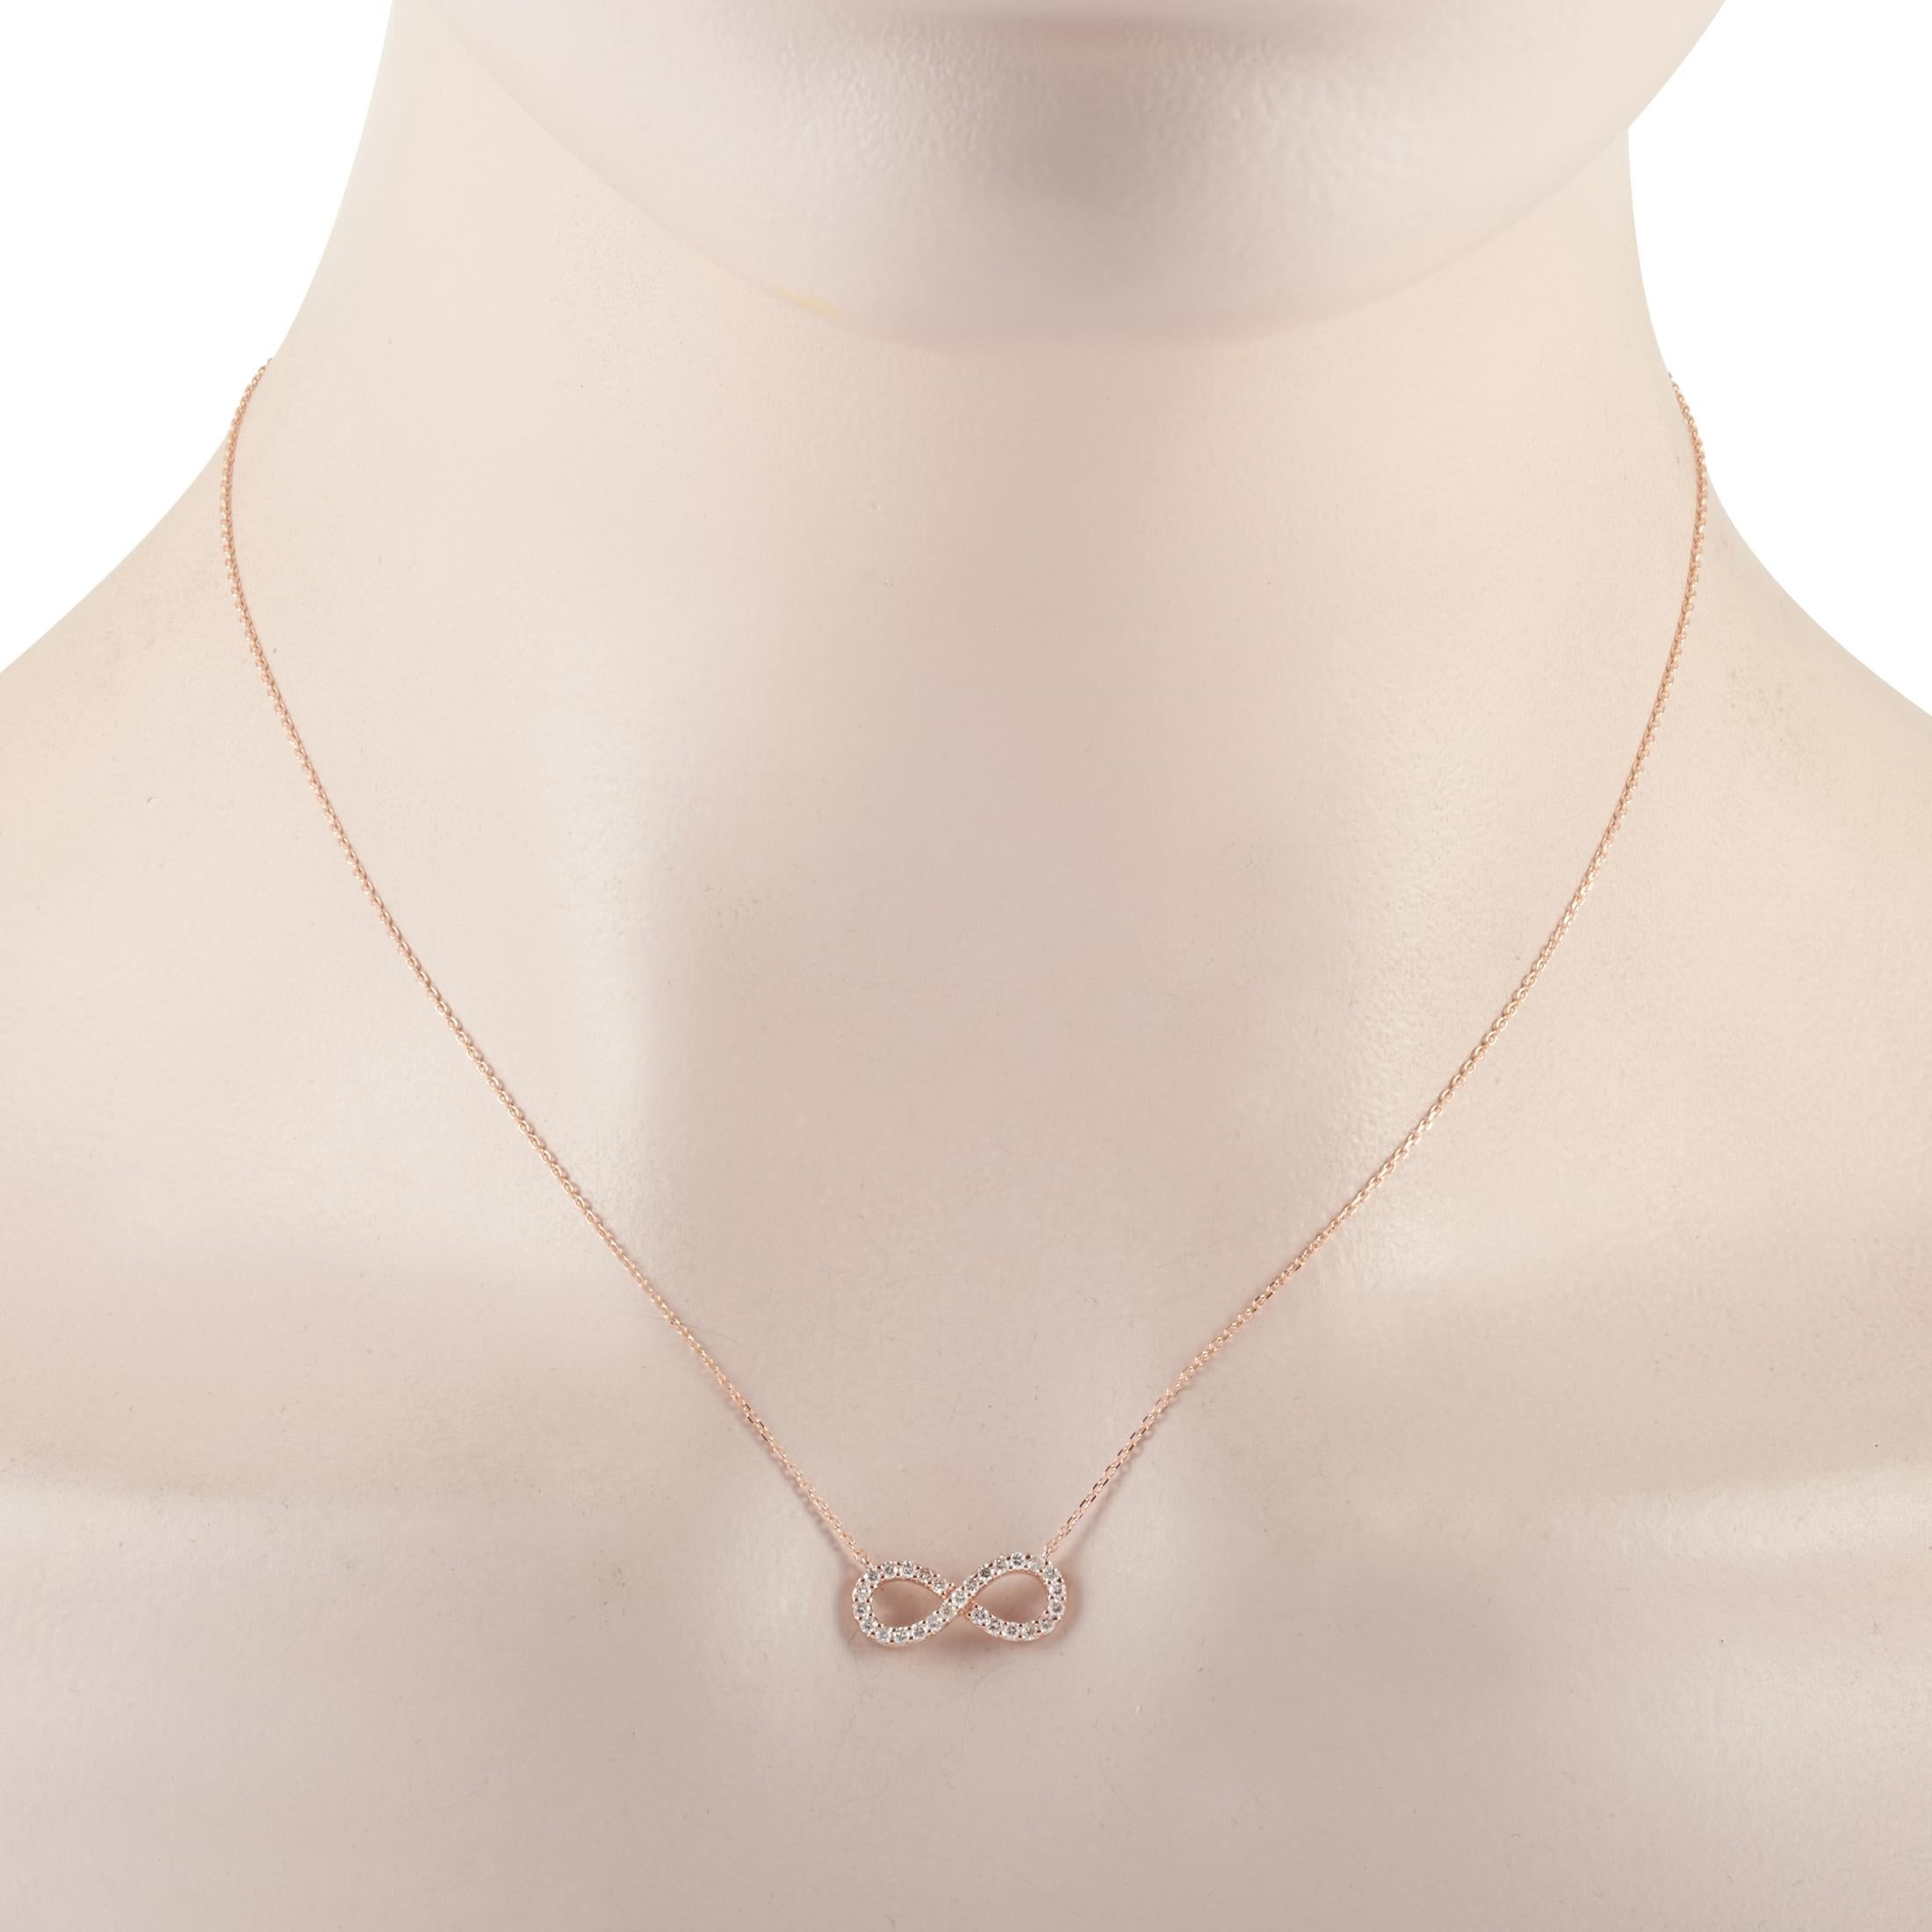 This LB Exclusive necklace is made of 14K rose gold and embellished with diamonds that amount to 0.30 carats. The necklace weighs 2 grams and boasts a 15” chain and an infinity symbol pendant that measures 0.25” in length and 0.63” in width.
 
